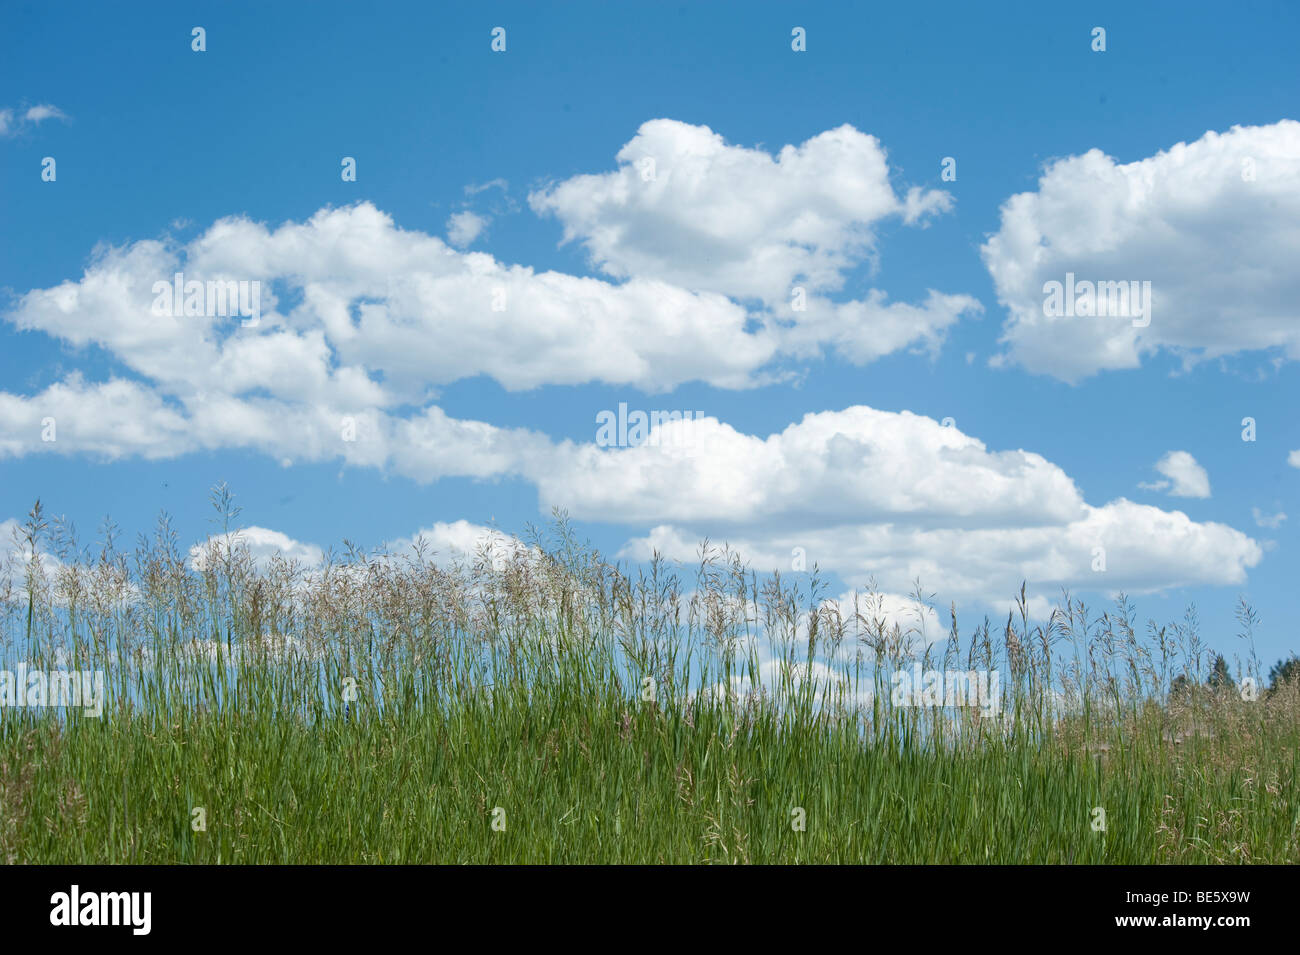 Cumulus clouds in clear blue sky with grass in foreground Stock Photo